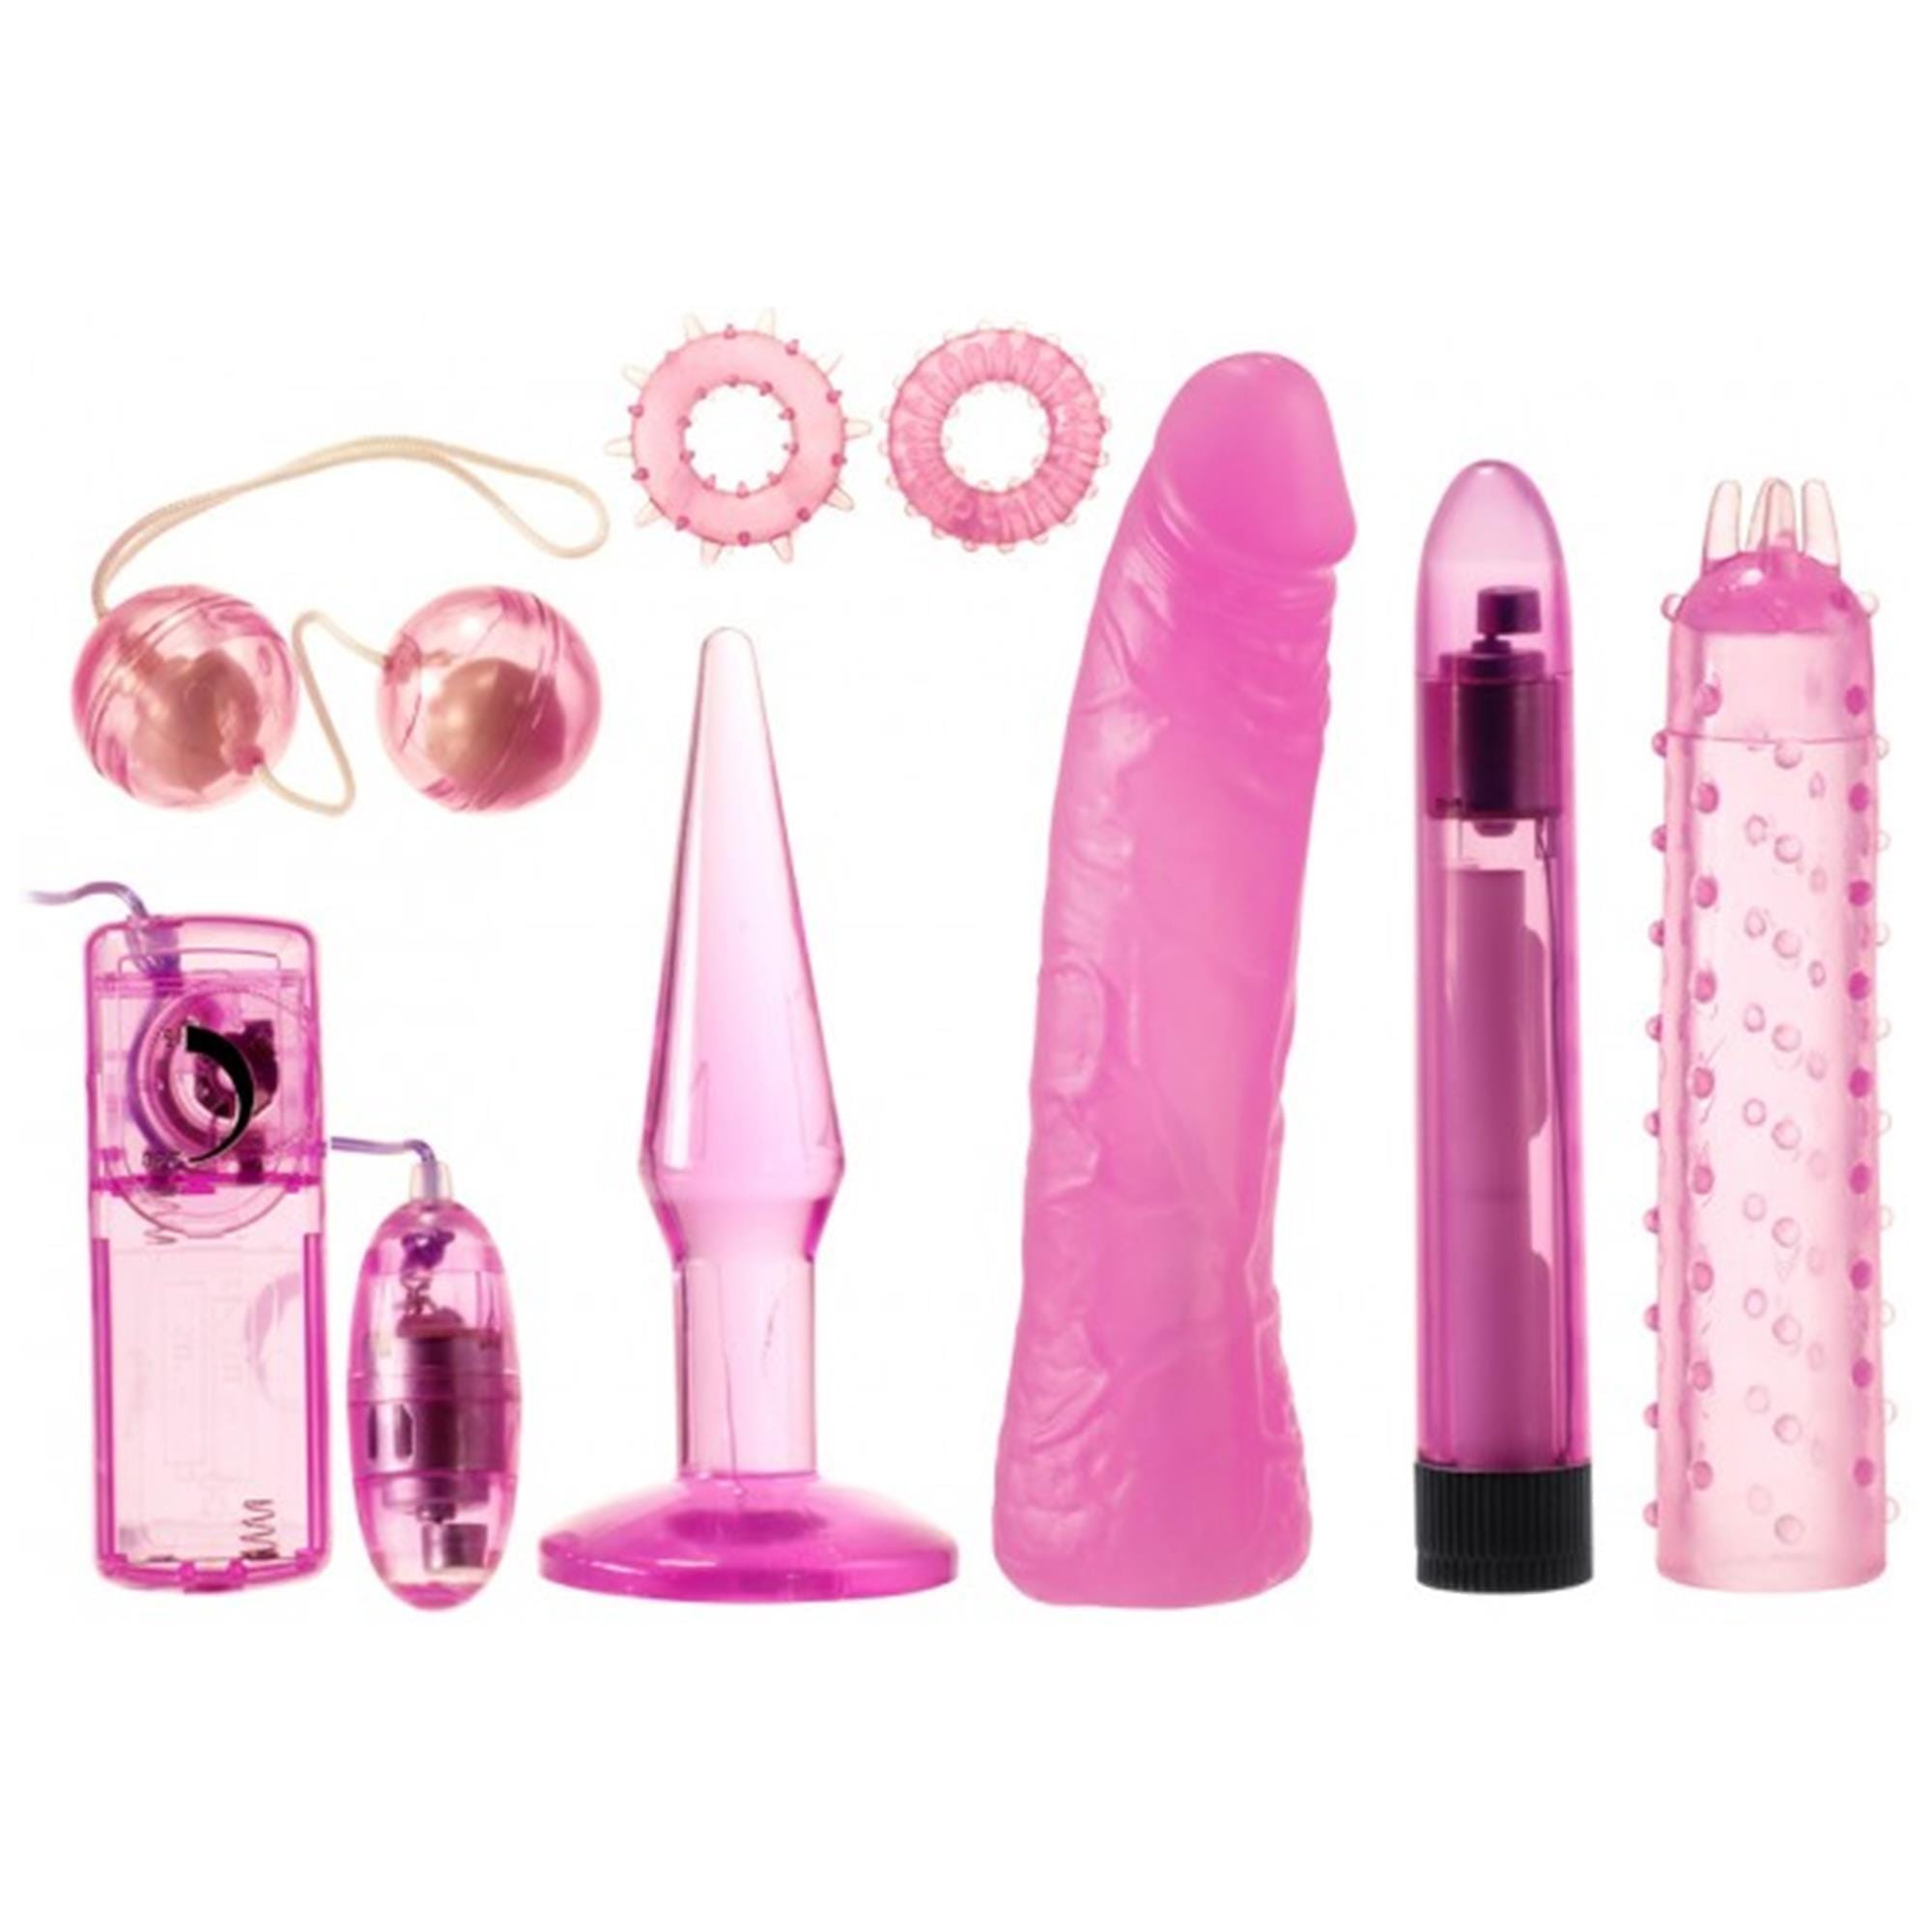 Mystic Treasures Toy Kit for Couples | Vibrator | Intimast